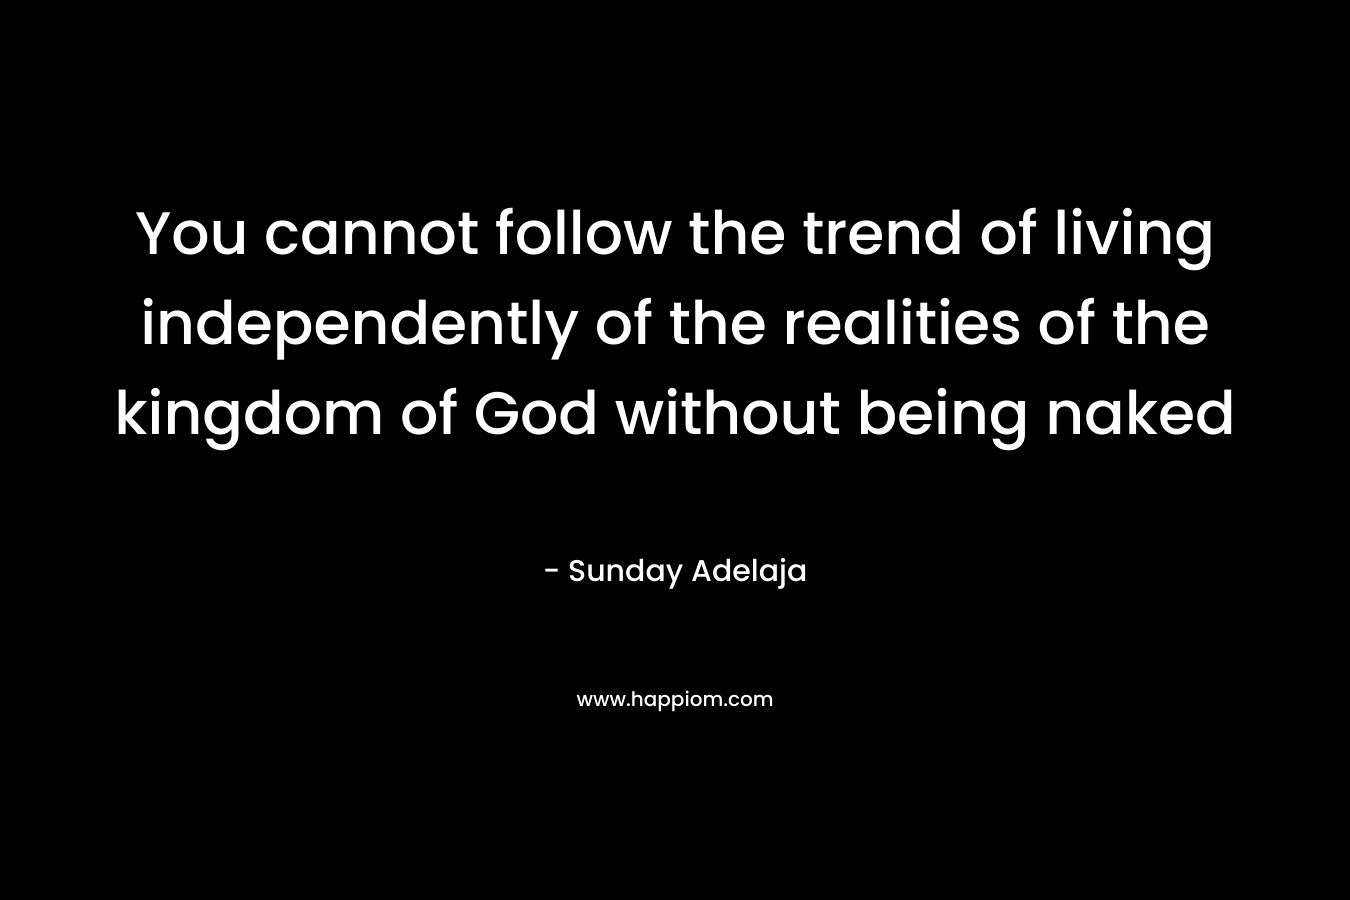 You cannot follow the trend of living independently of the realities of the kingdom of God without being naked